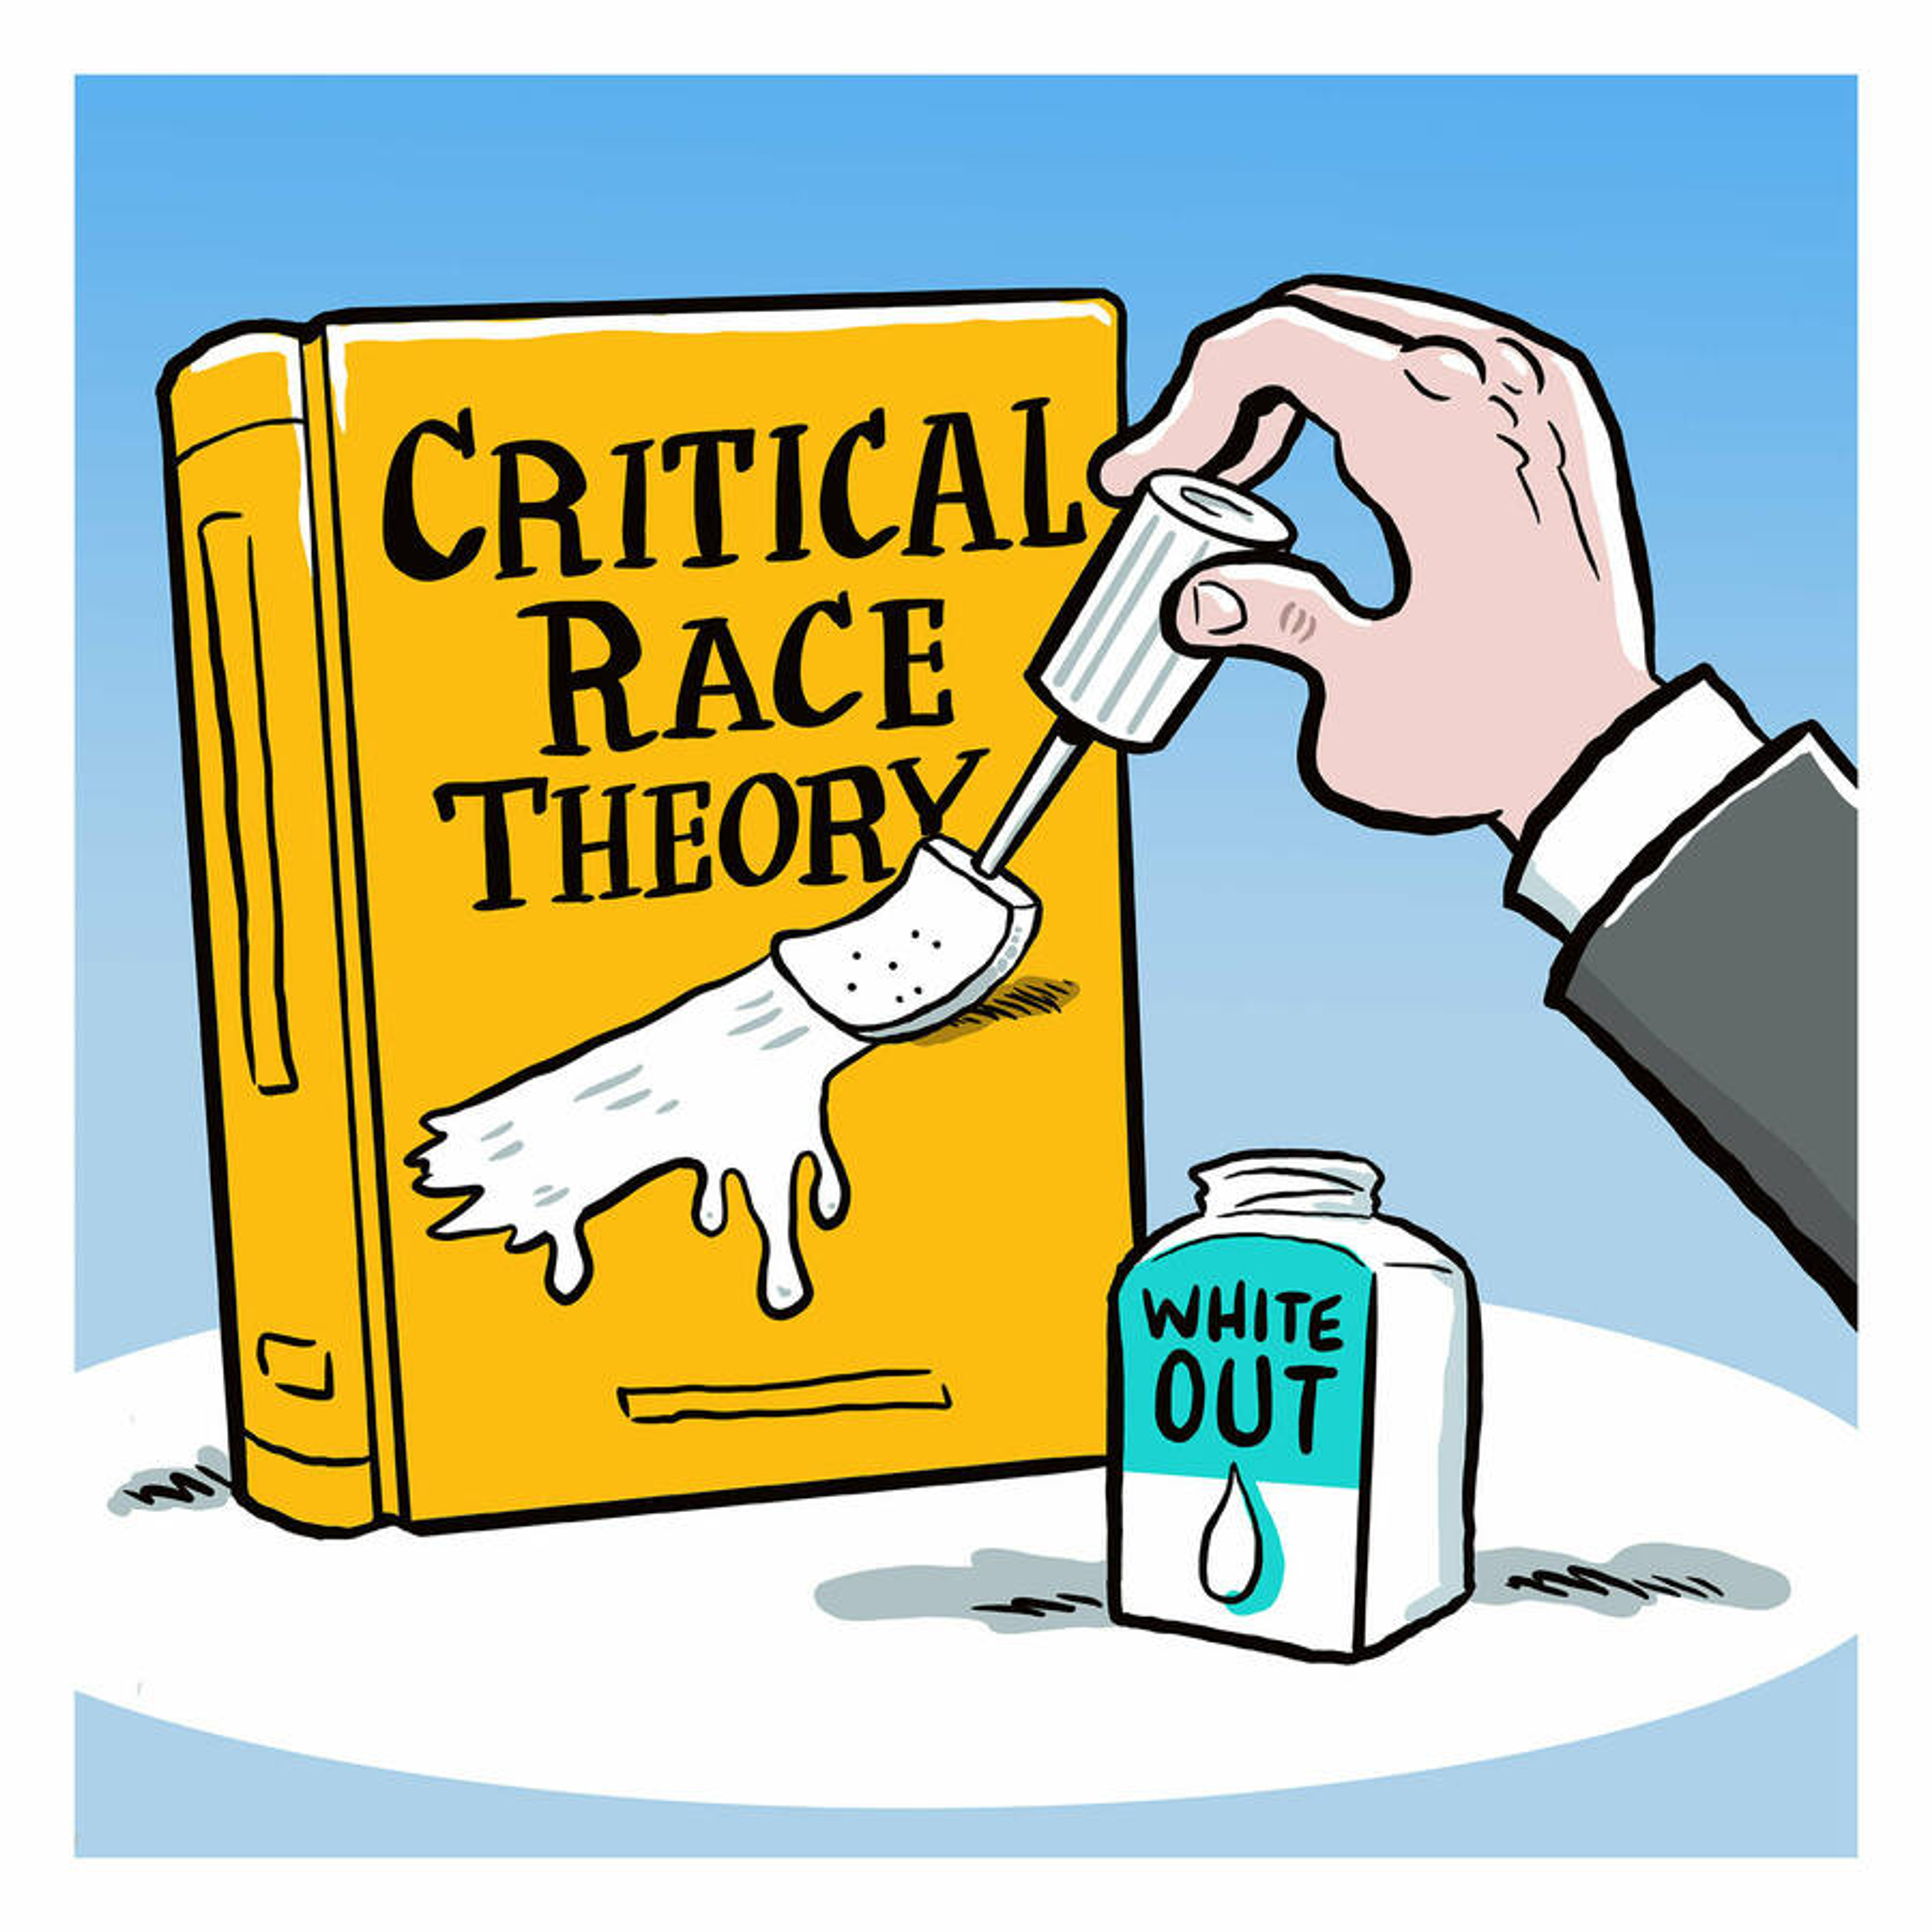 Book on Critical Race Theory being whitewashed.